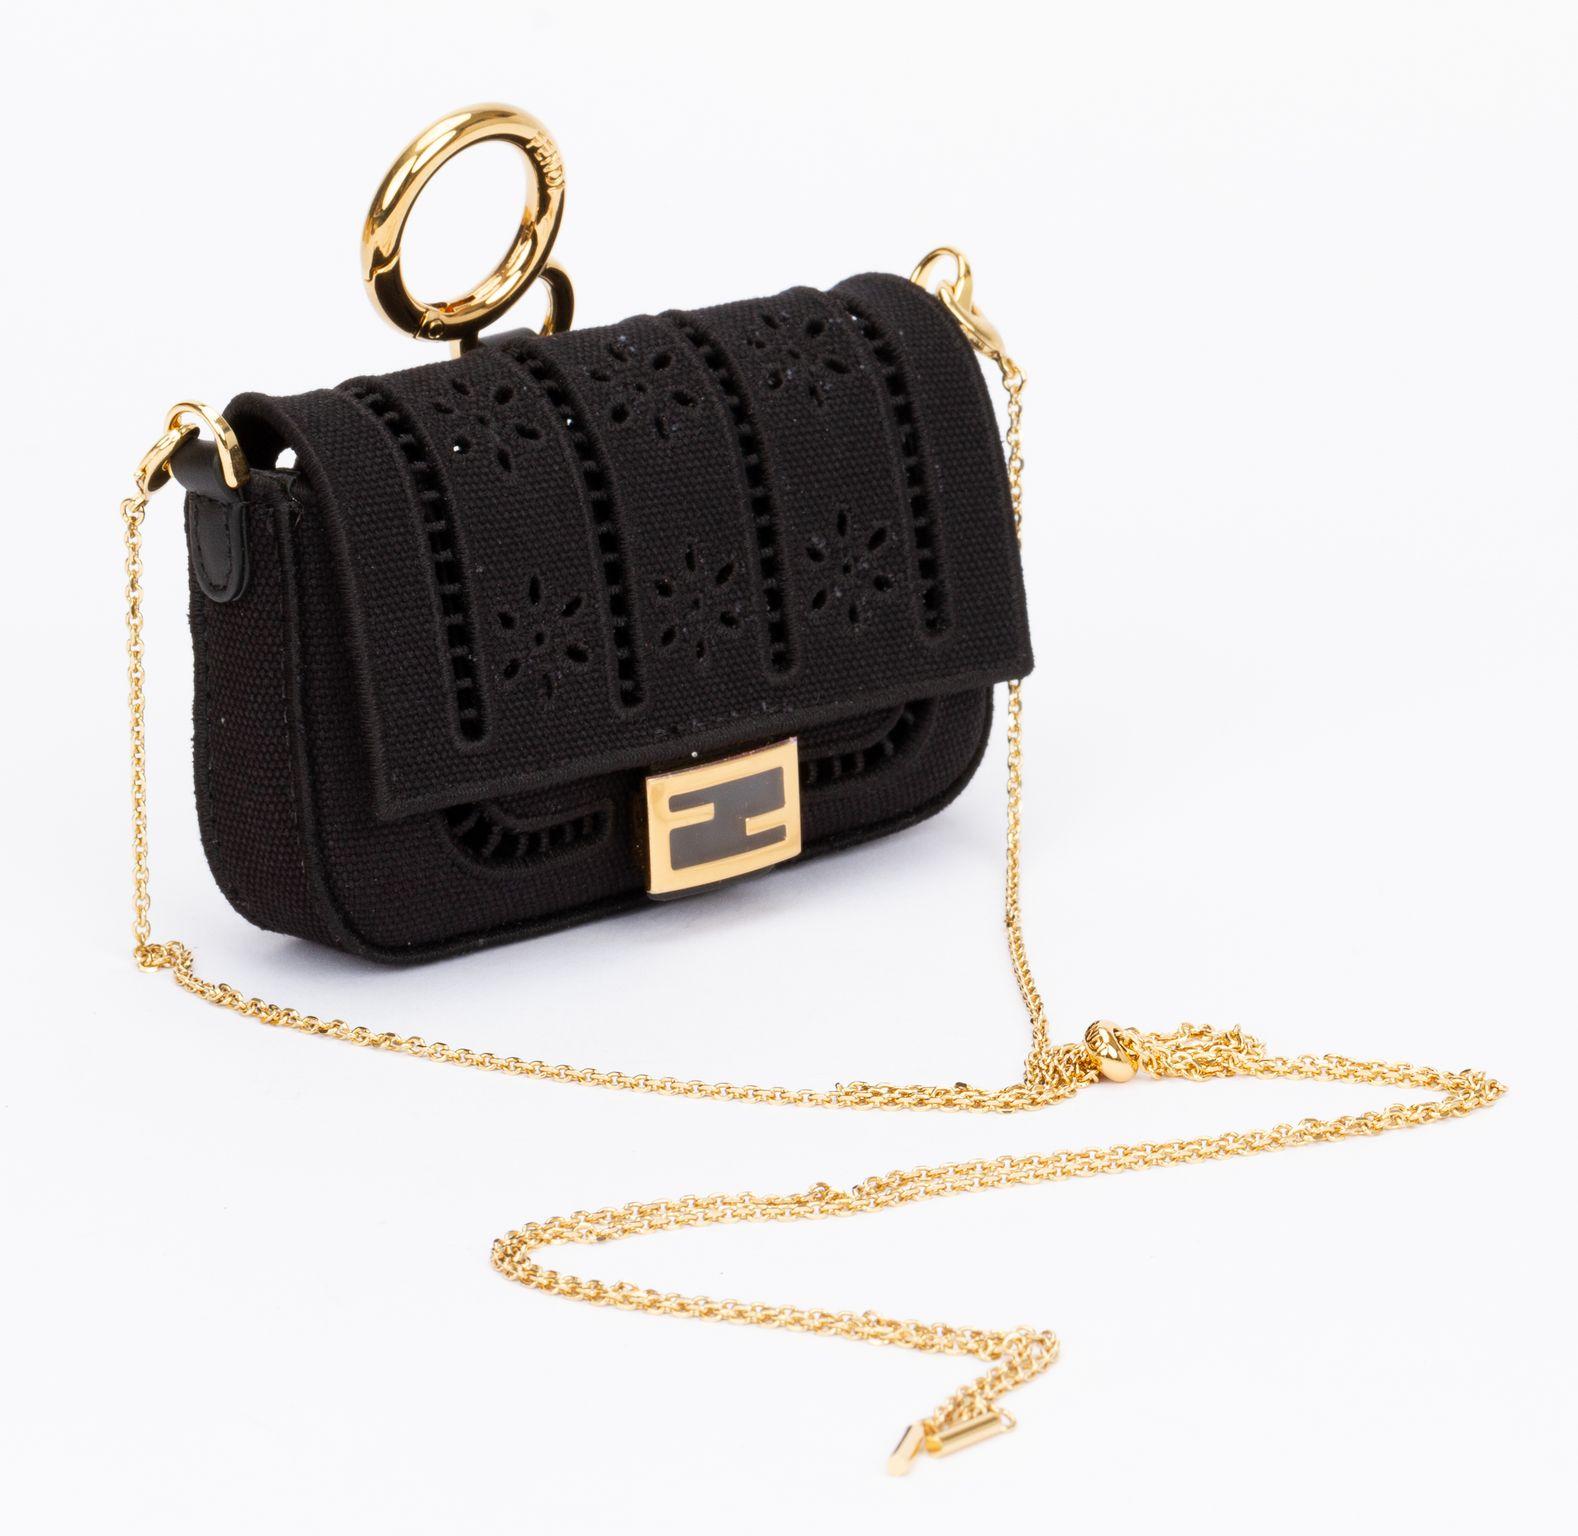 Fendi canvas embroidered nano baguette in black. The nano charm is made of black perforated canvas. It can be attached to a belt or clipped on to a bigger bag or it can be worn crossbody with the polished gold chain shoulder strap. (drop up to 19